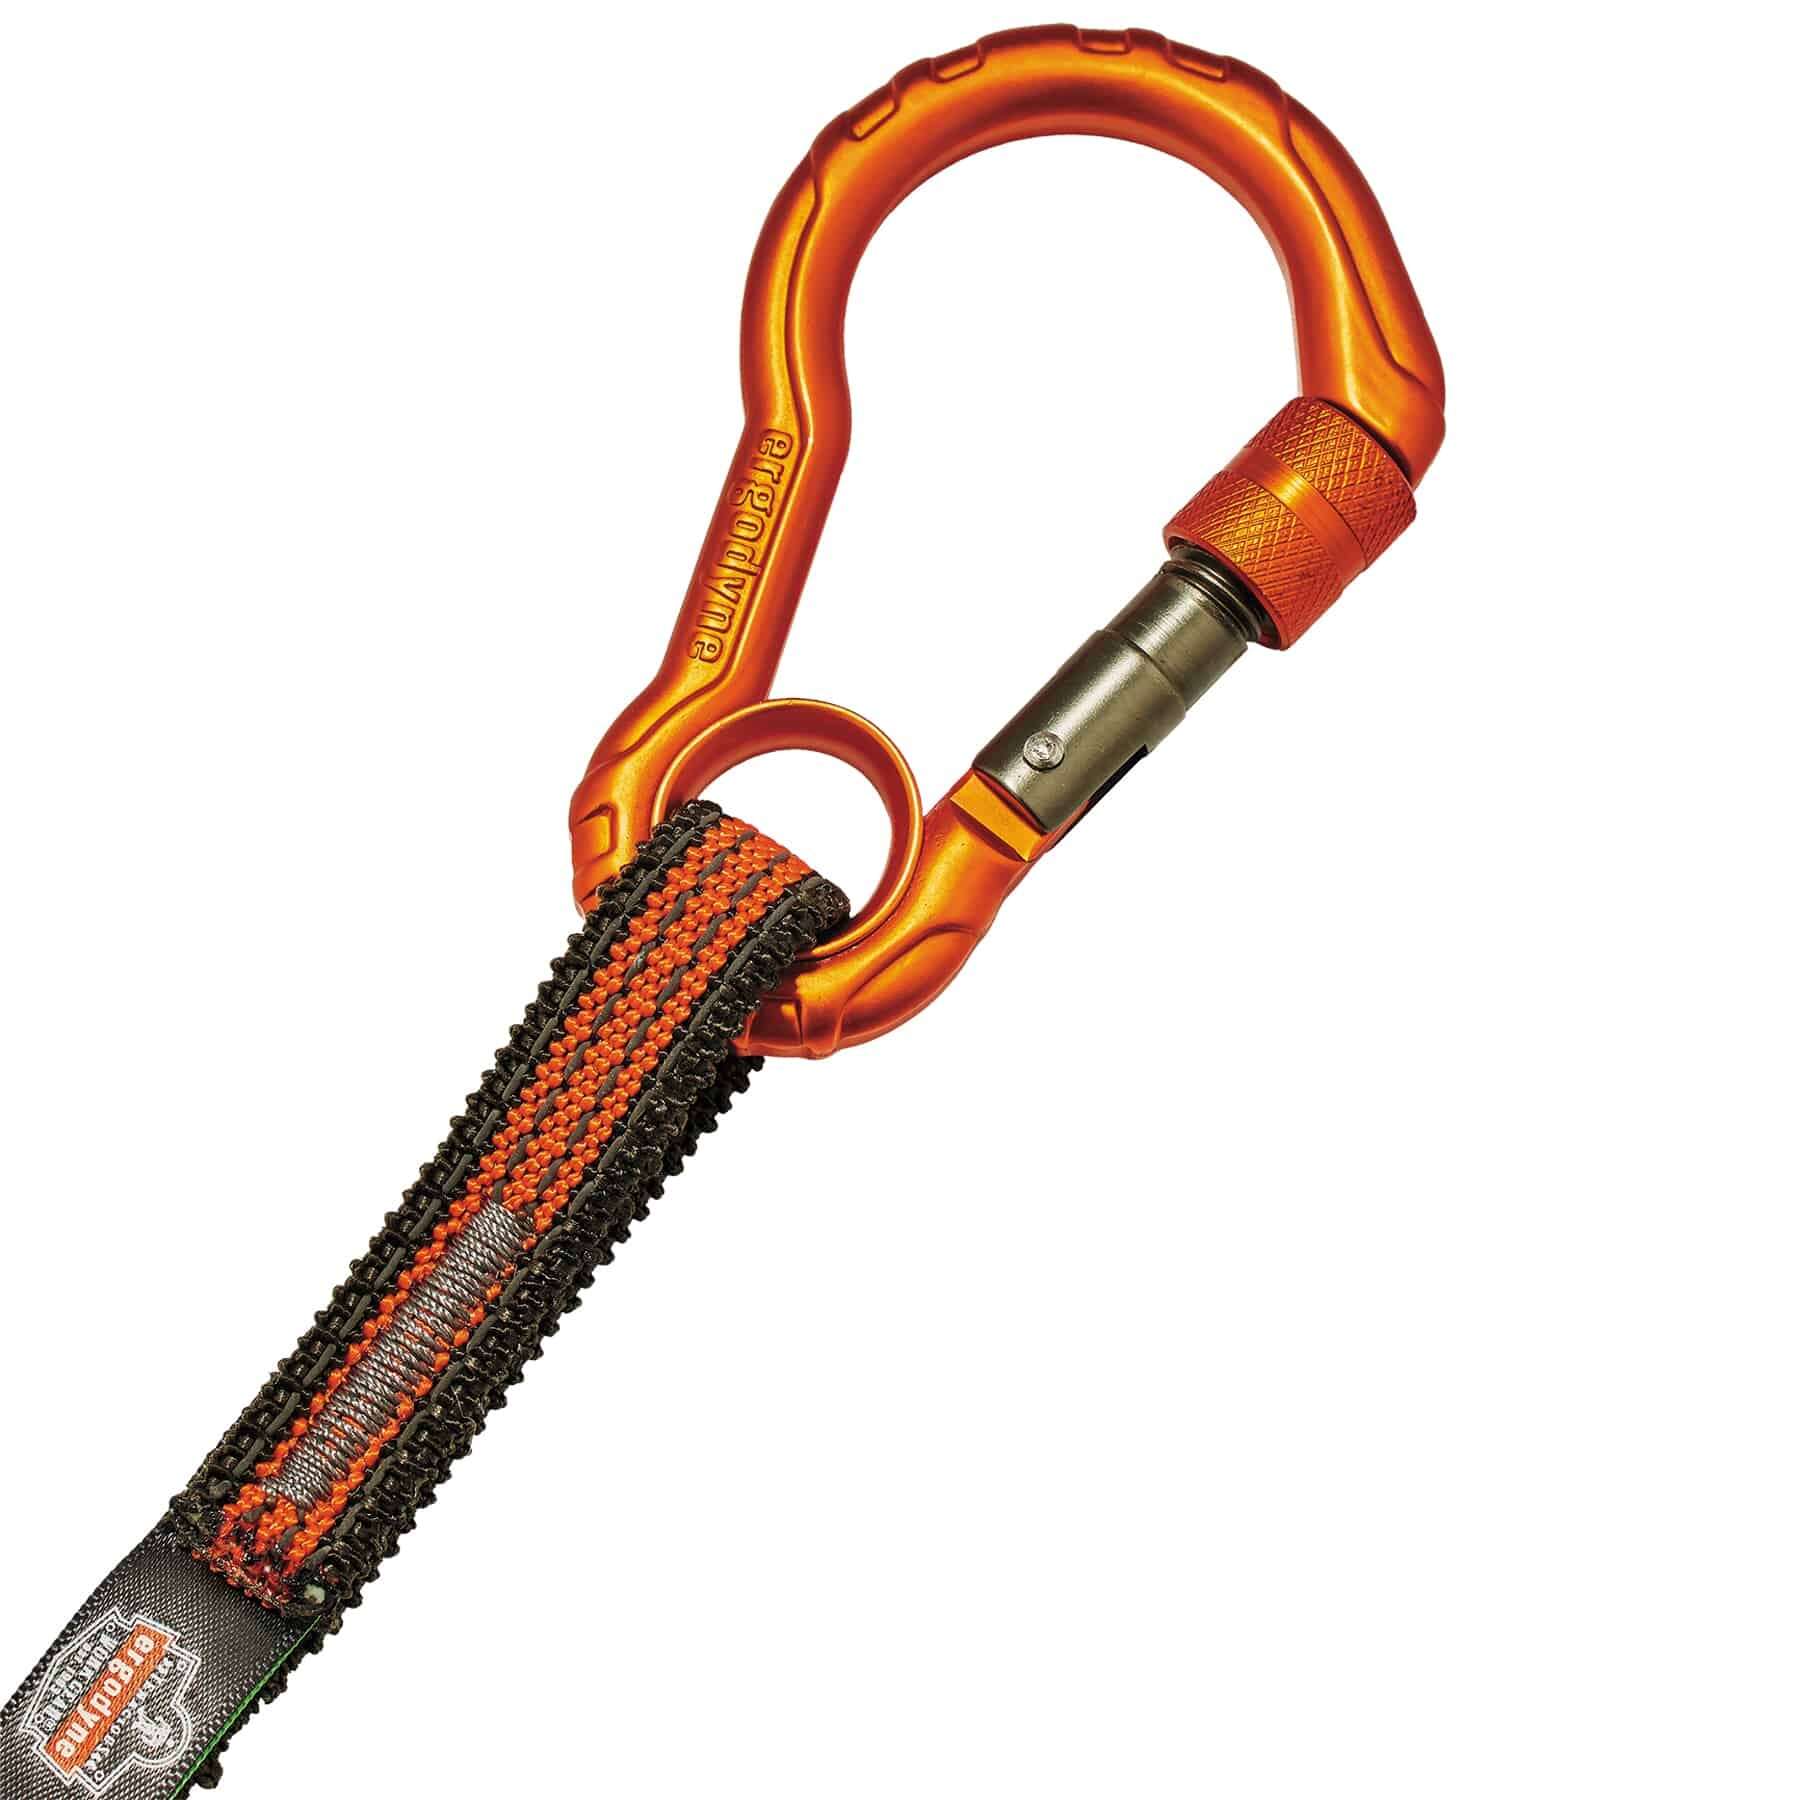 Knipex Tool Tethering 38 Lanyard with Captive Eye Carabiner, Limit 13 lbs.